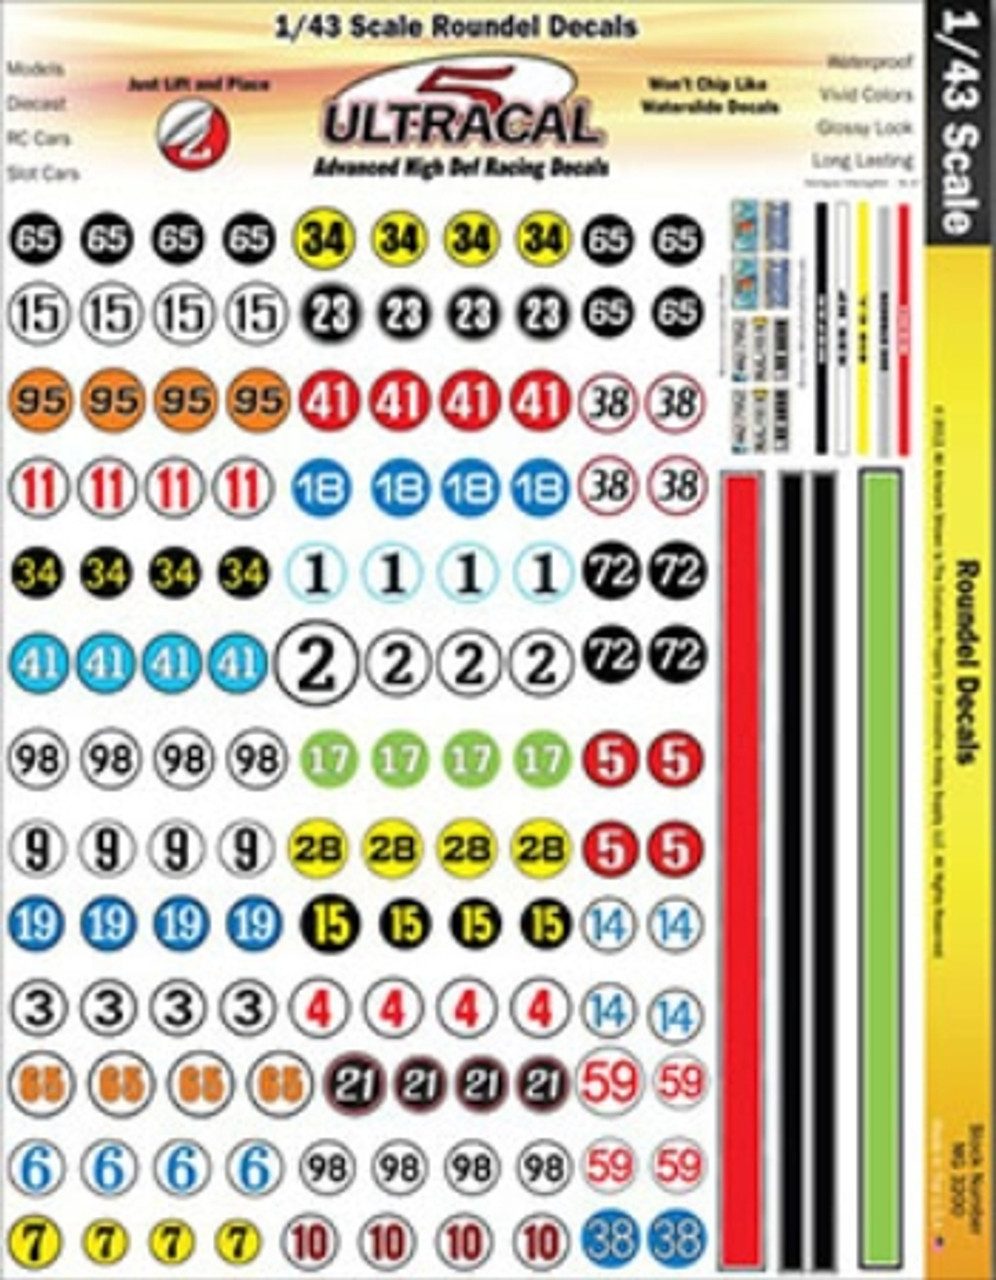 Ultracal 1/43 Racing Numbers & Round Decals - MG-3200